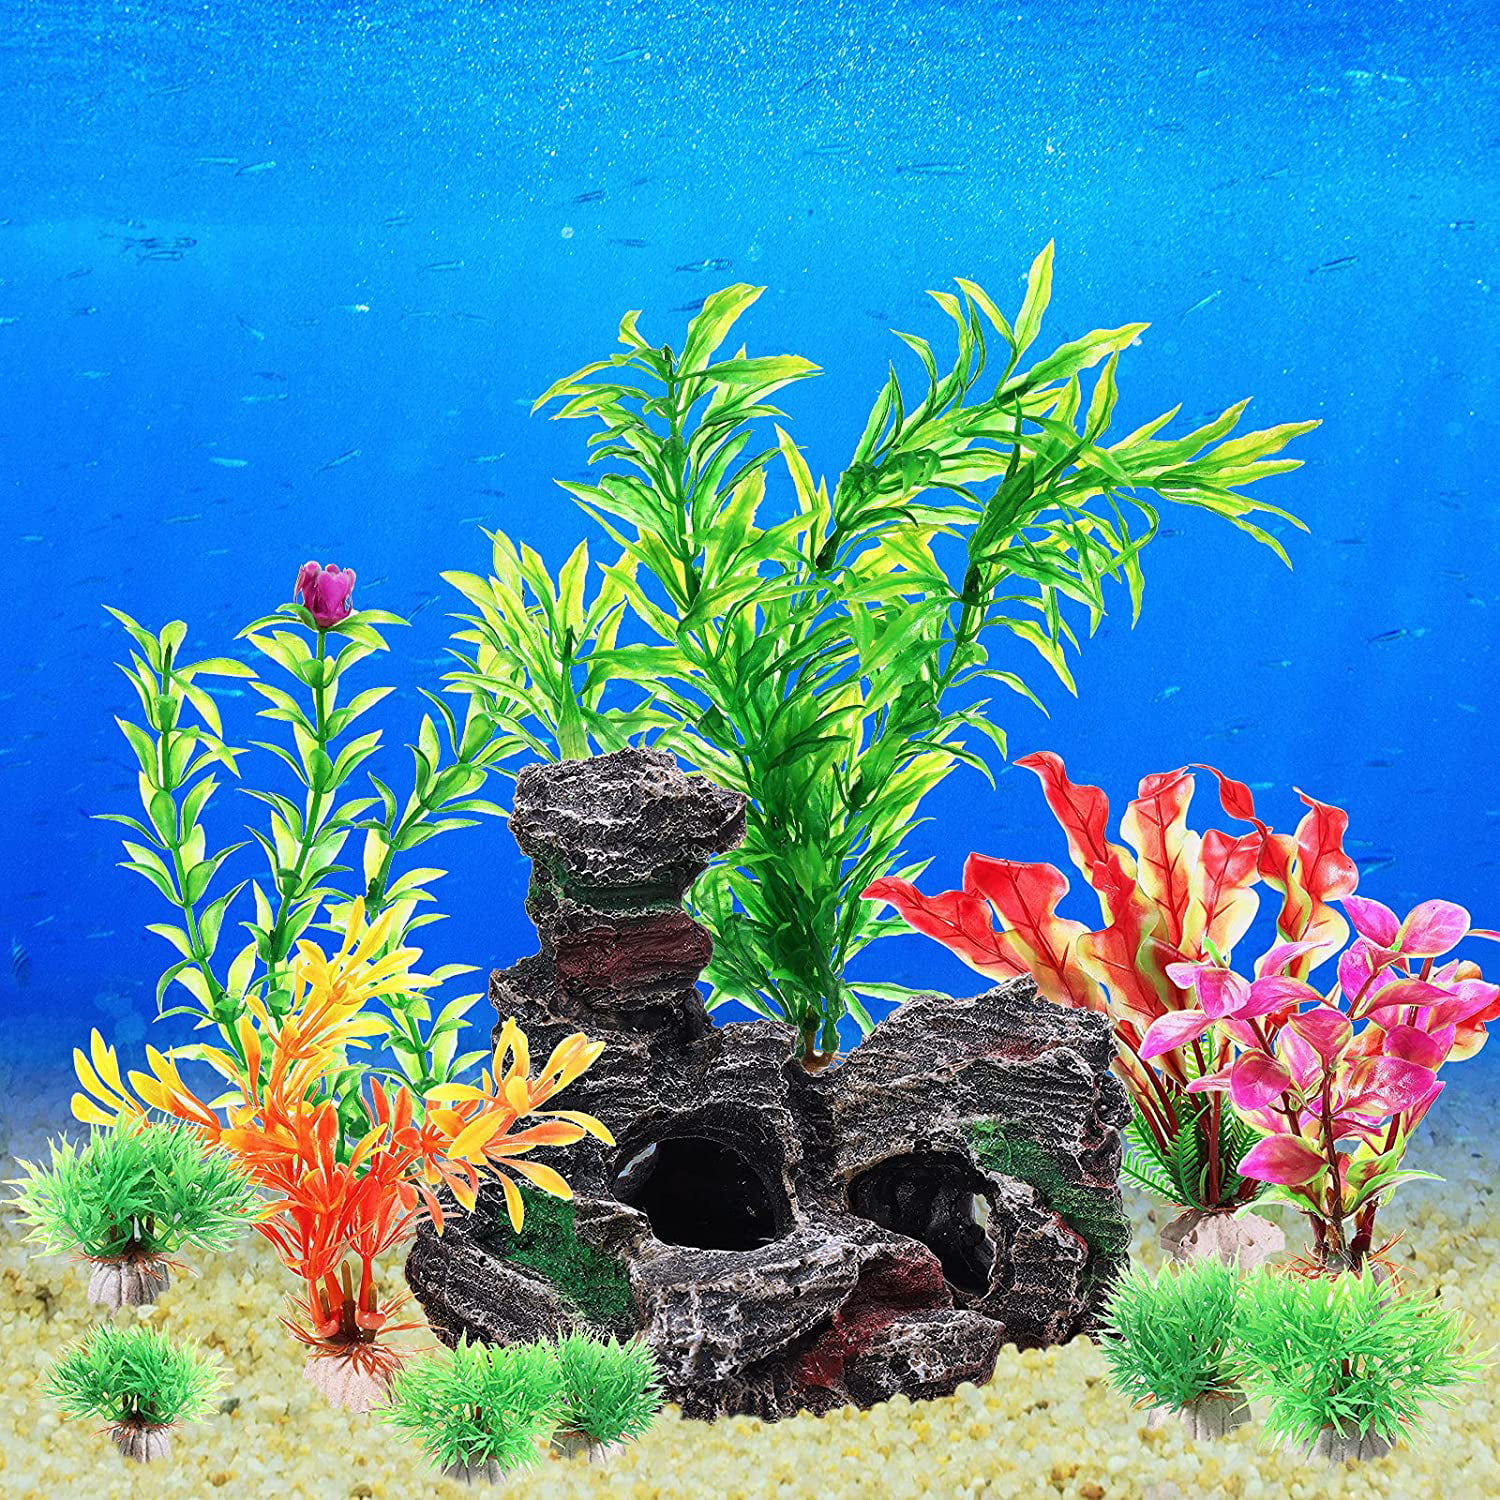 11 Pieces Aquariums Plants Decorations Simulation Plastic Hydroponic Plants Small and Large Artificial Aquarium Plants with Cave Rock for Betta Fish Tank Plants and Resinous Rockery